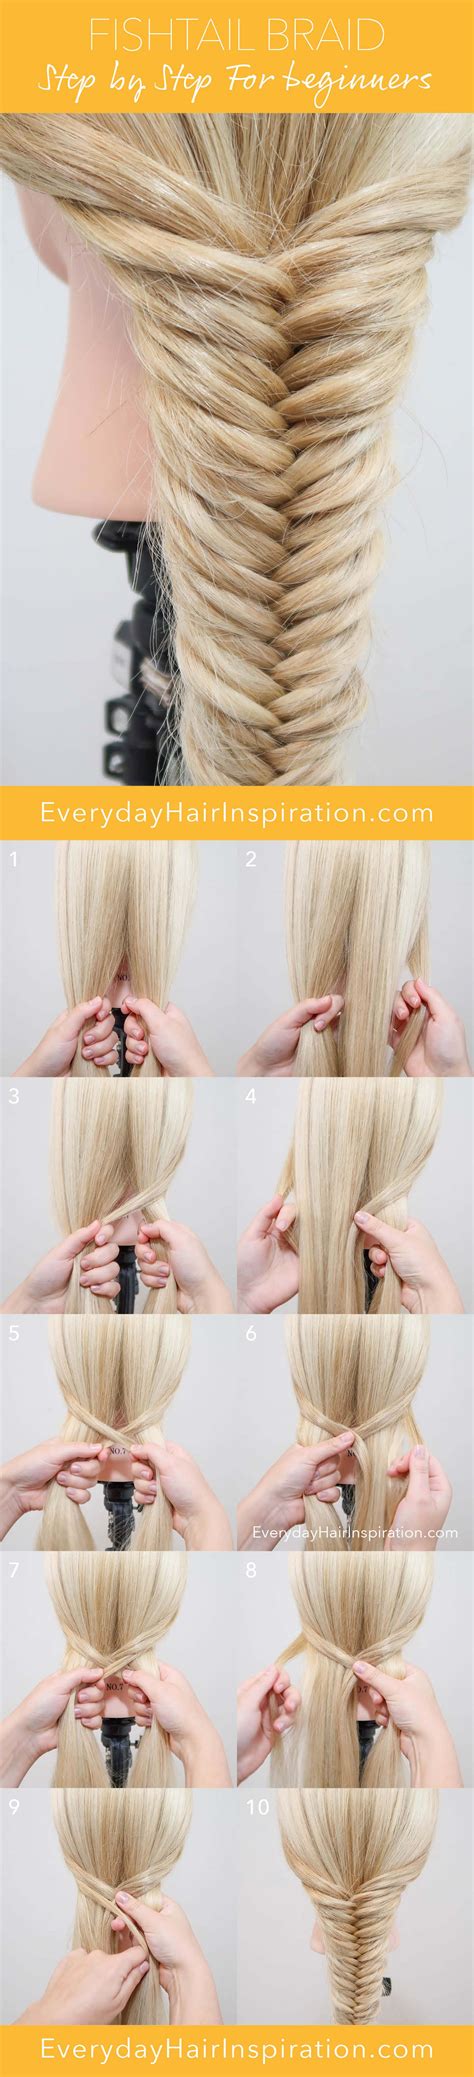 The Ultimate Fishtail Braid Tutorial and Howto Guide Beautylish